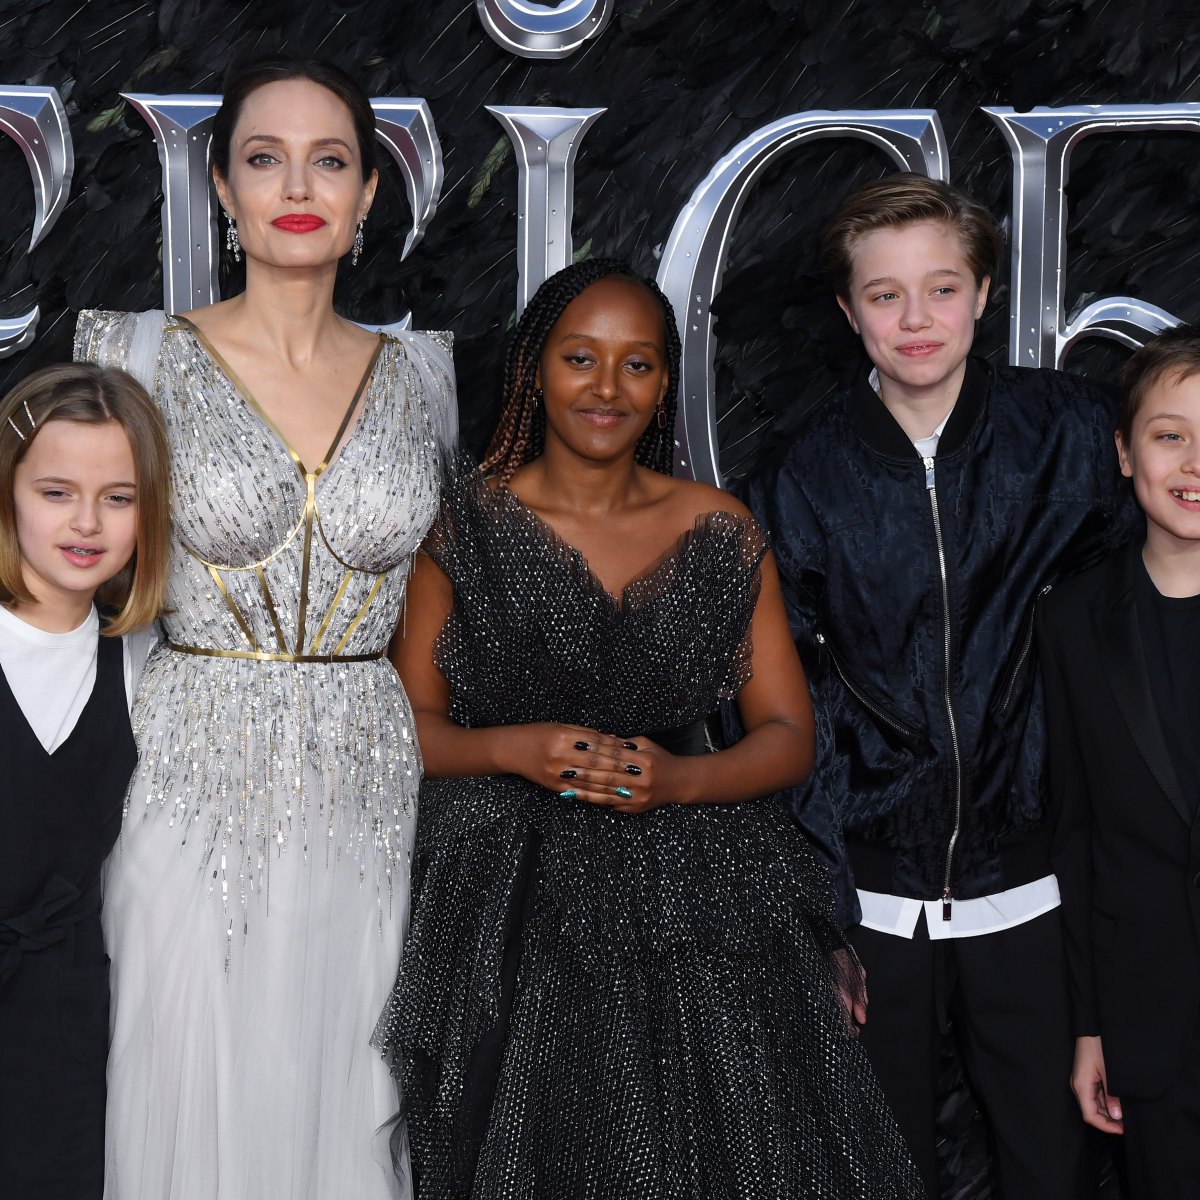 Shiloh Jolie-Pitt Wears Angelina Jolie Inspired '90s Outfit